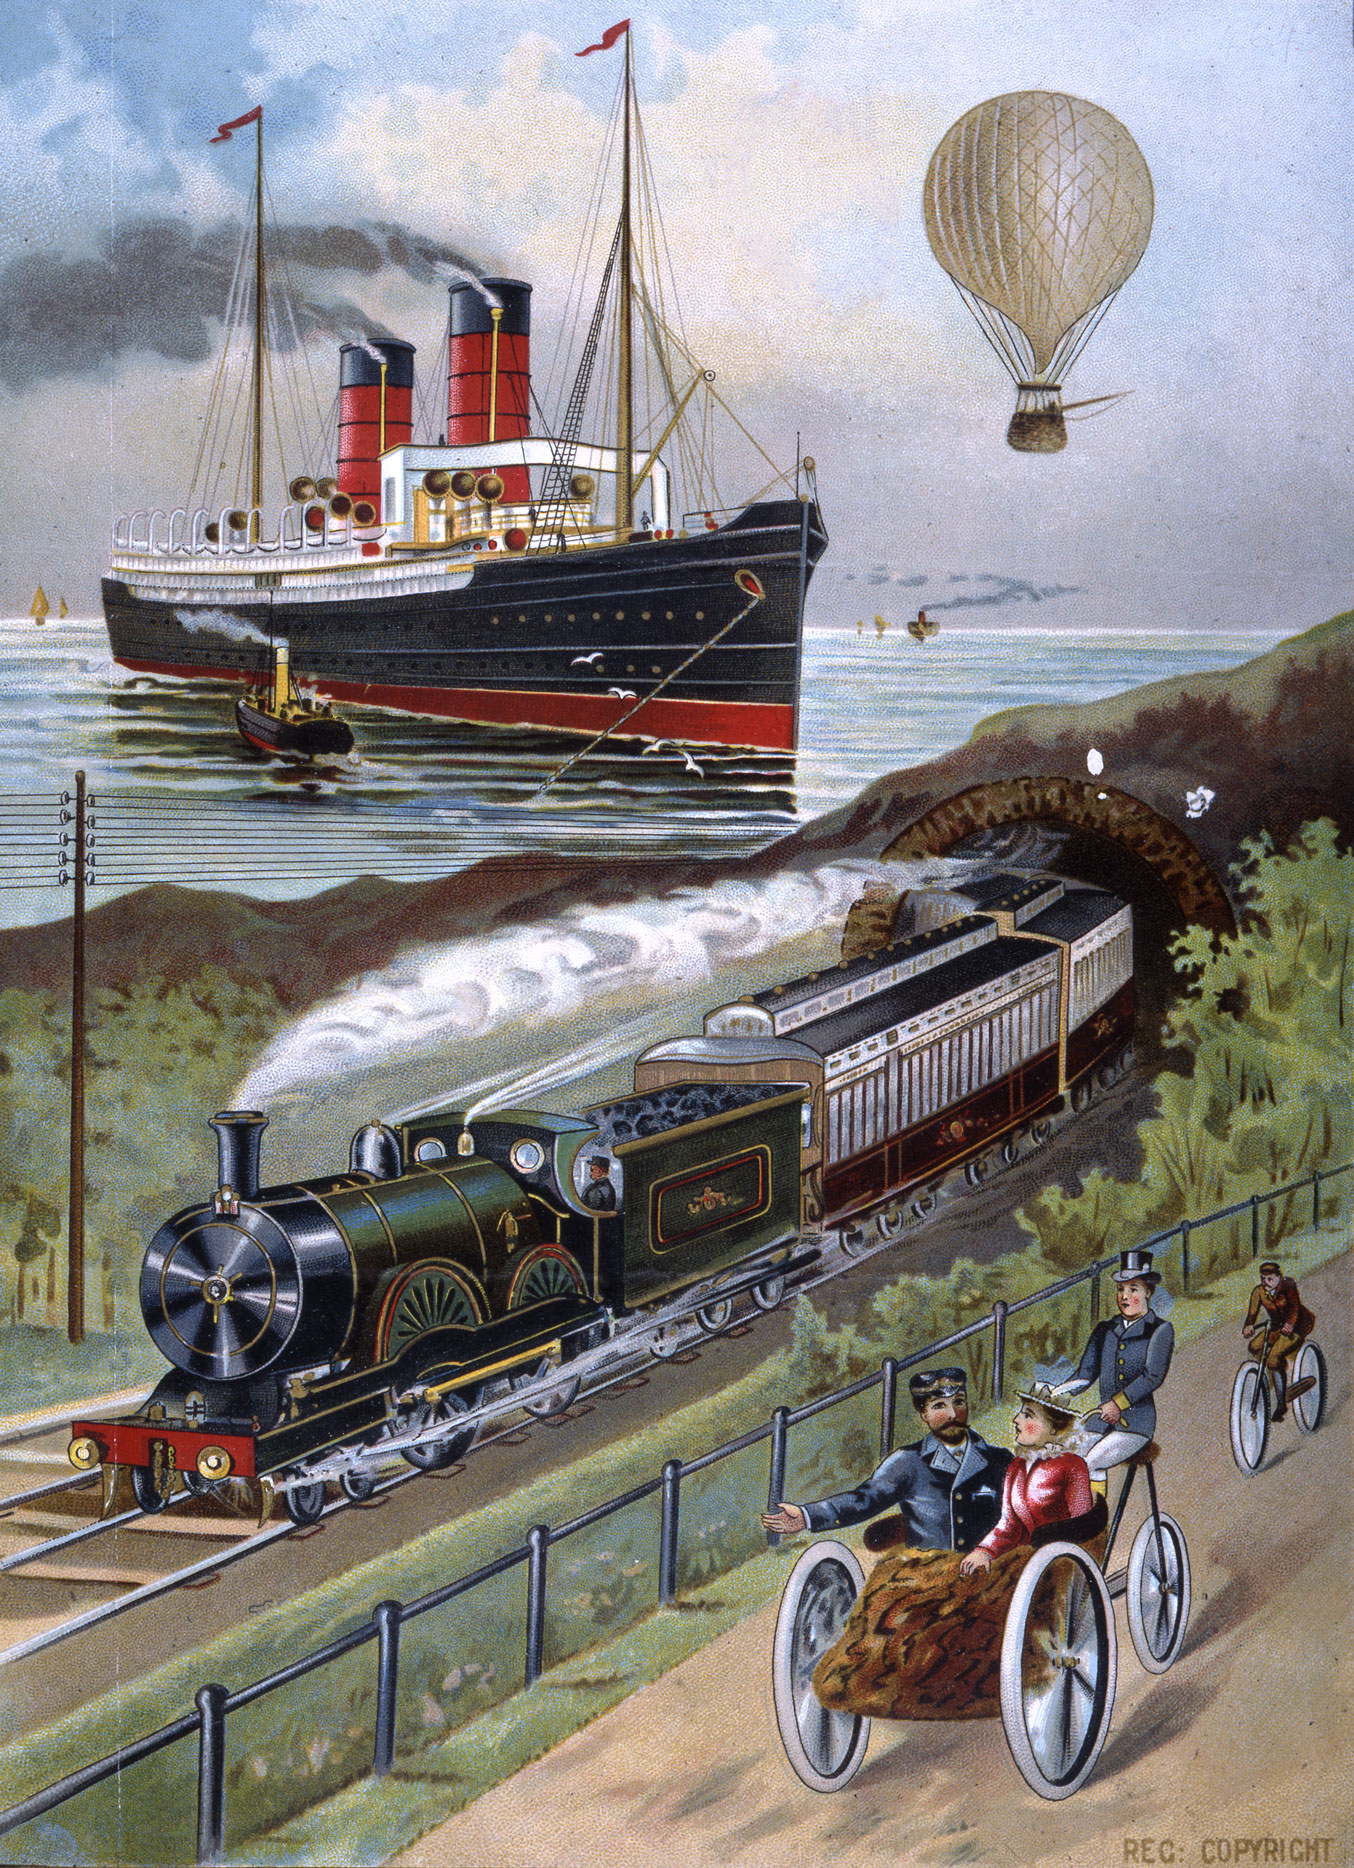 Poster featuring a hot air balloon in the sky, a ship on the ocean, a steam train going through a tunnel, and people biking on a road.